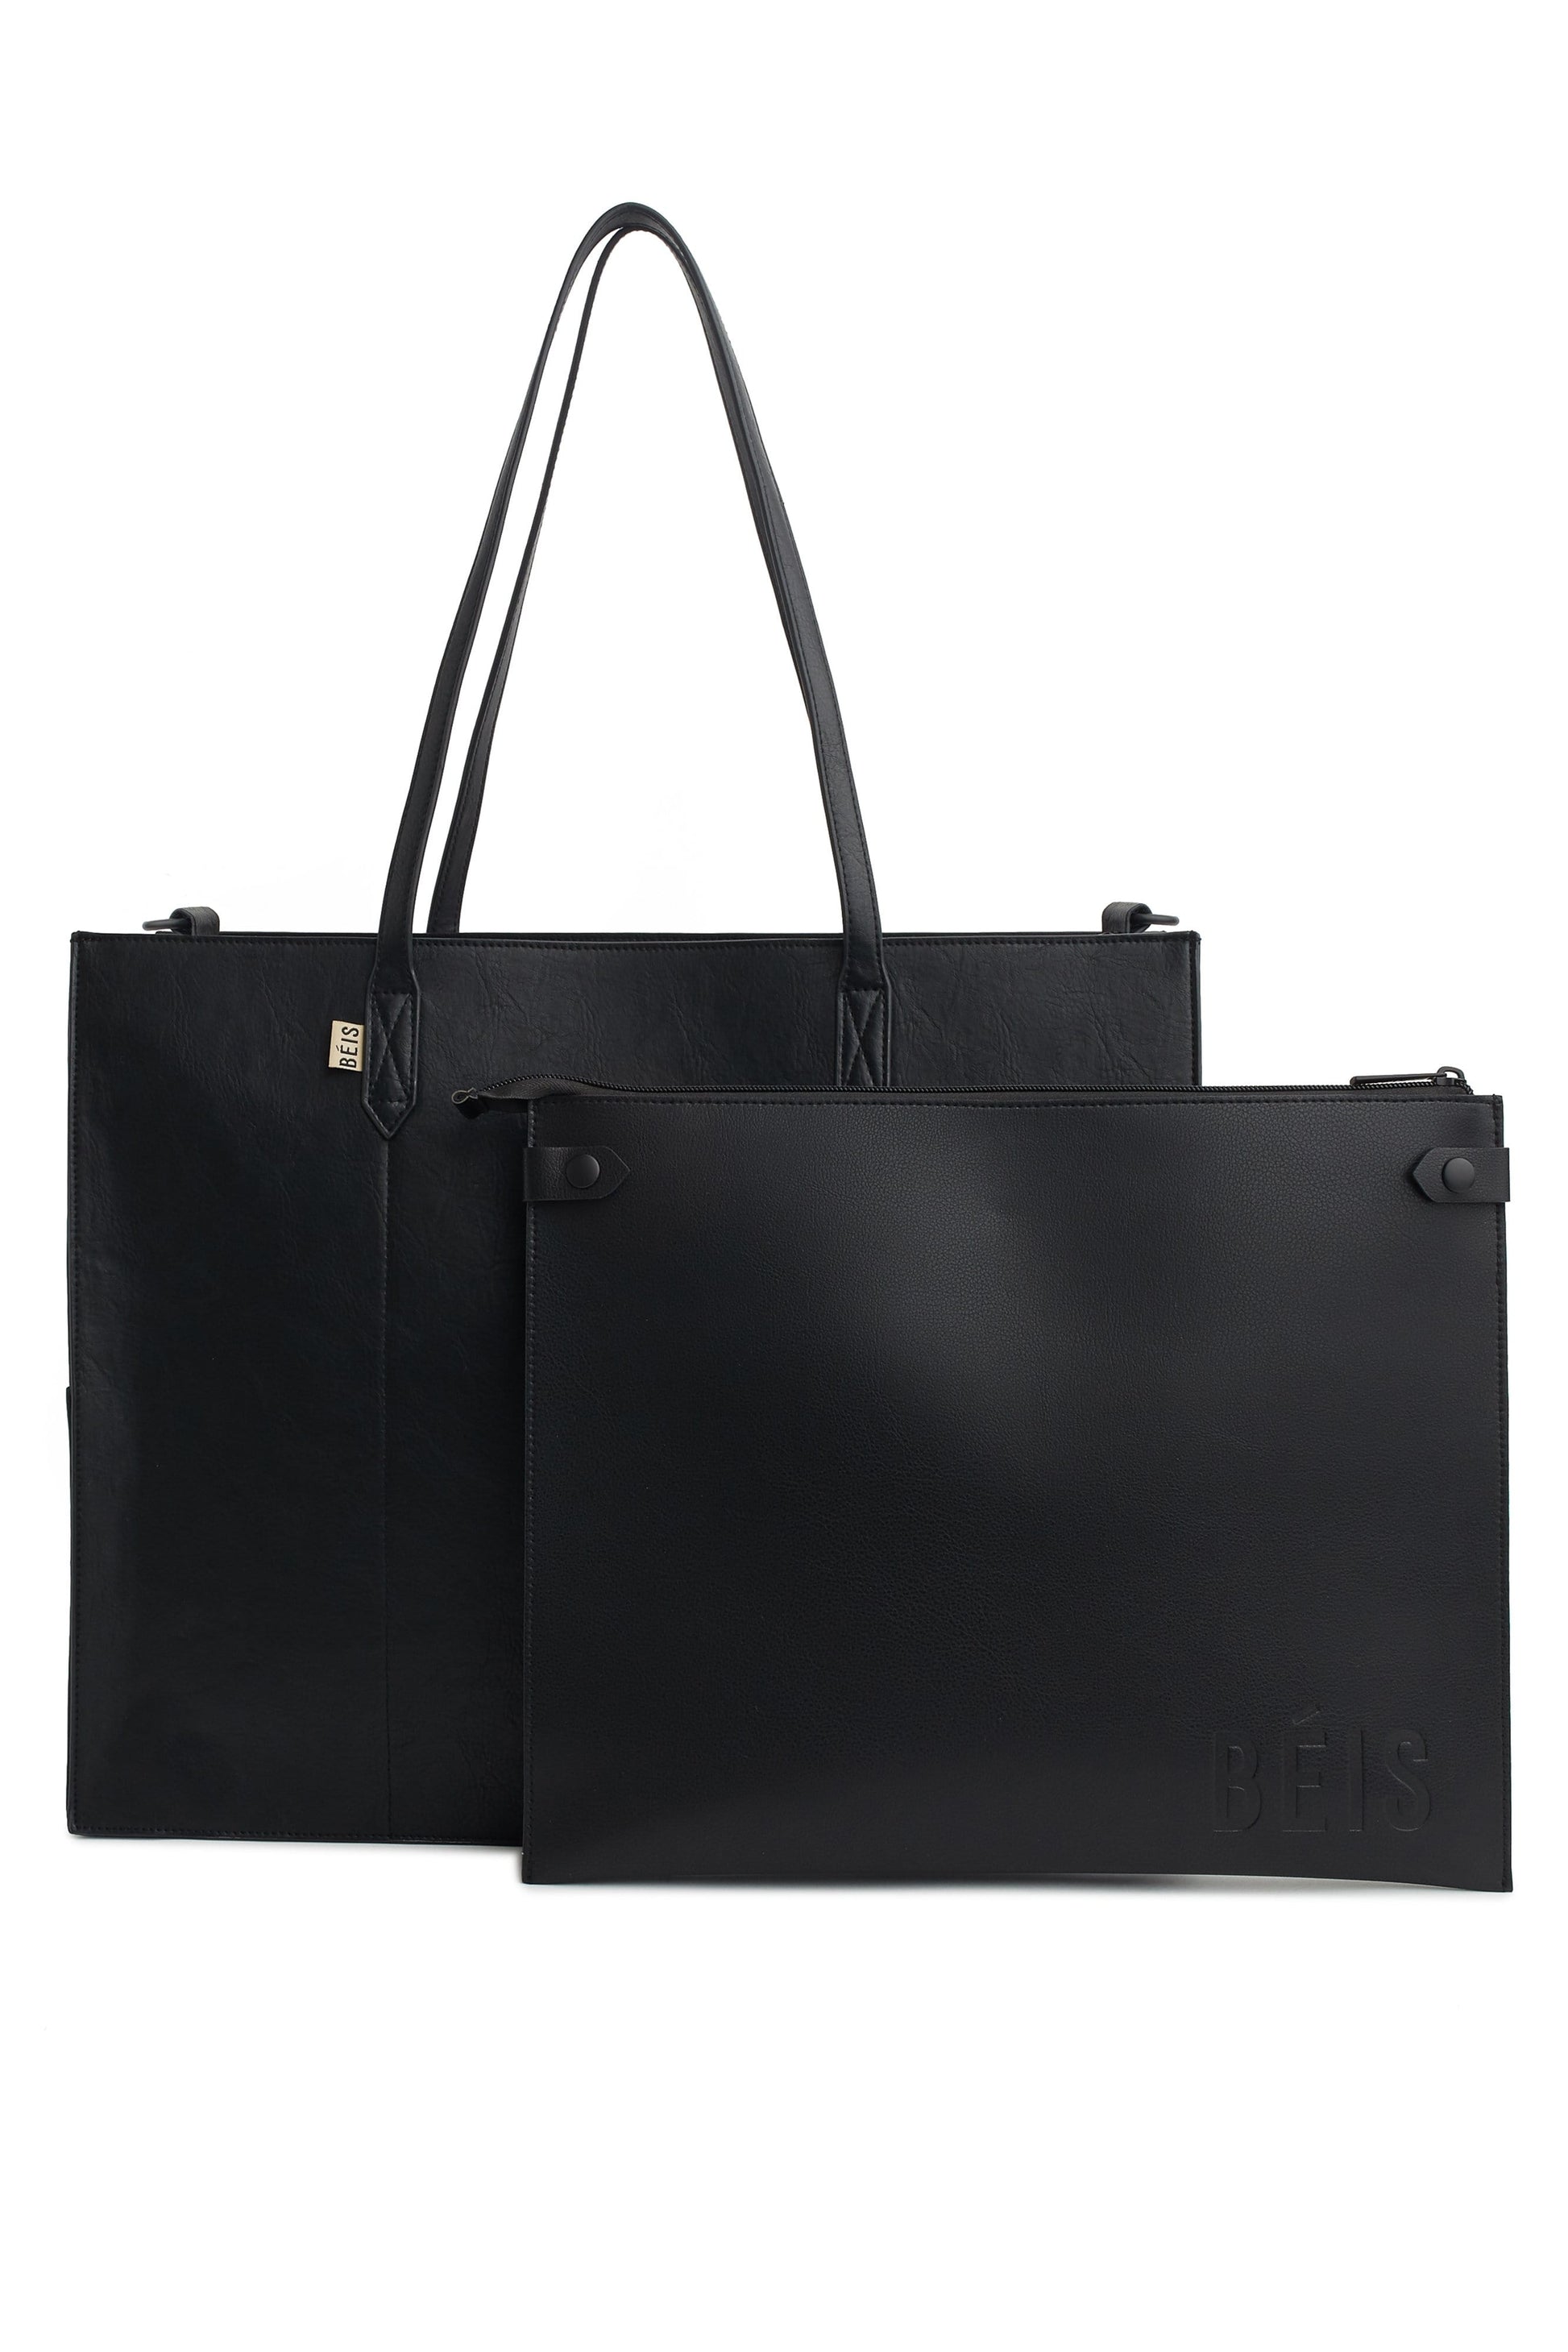 Work Tote Black Front with Removable Black Pouch